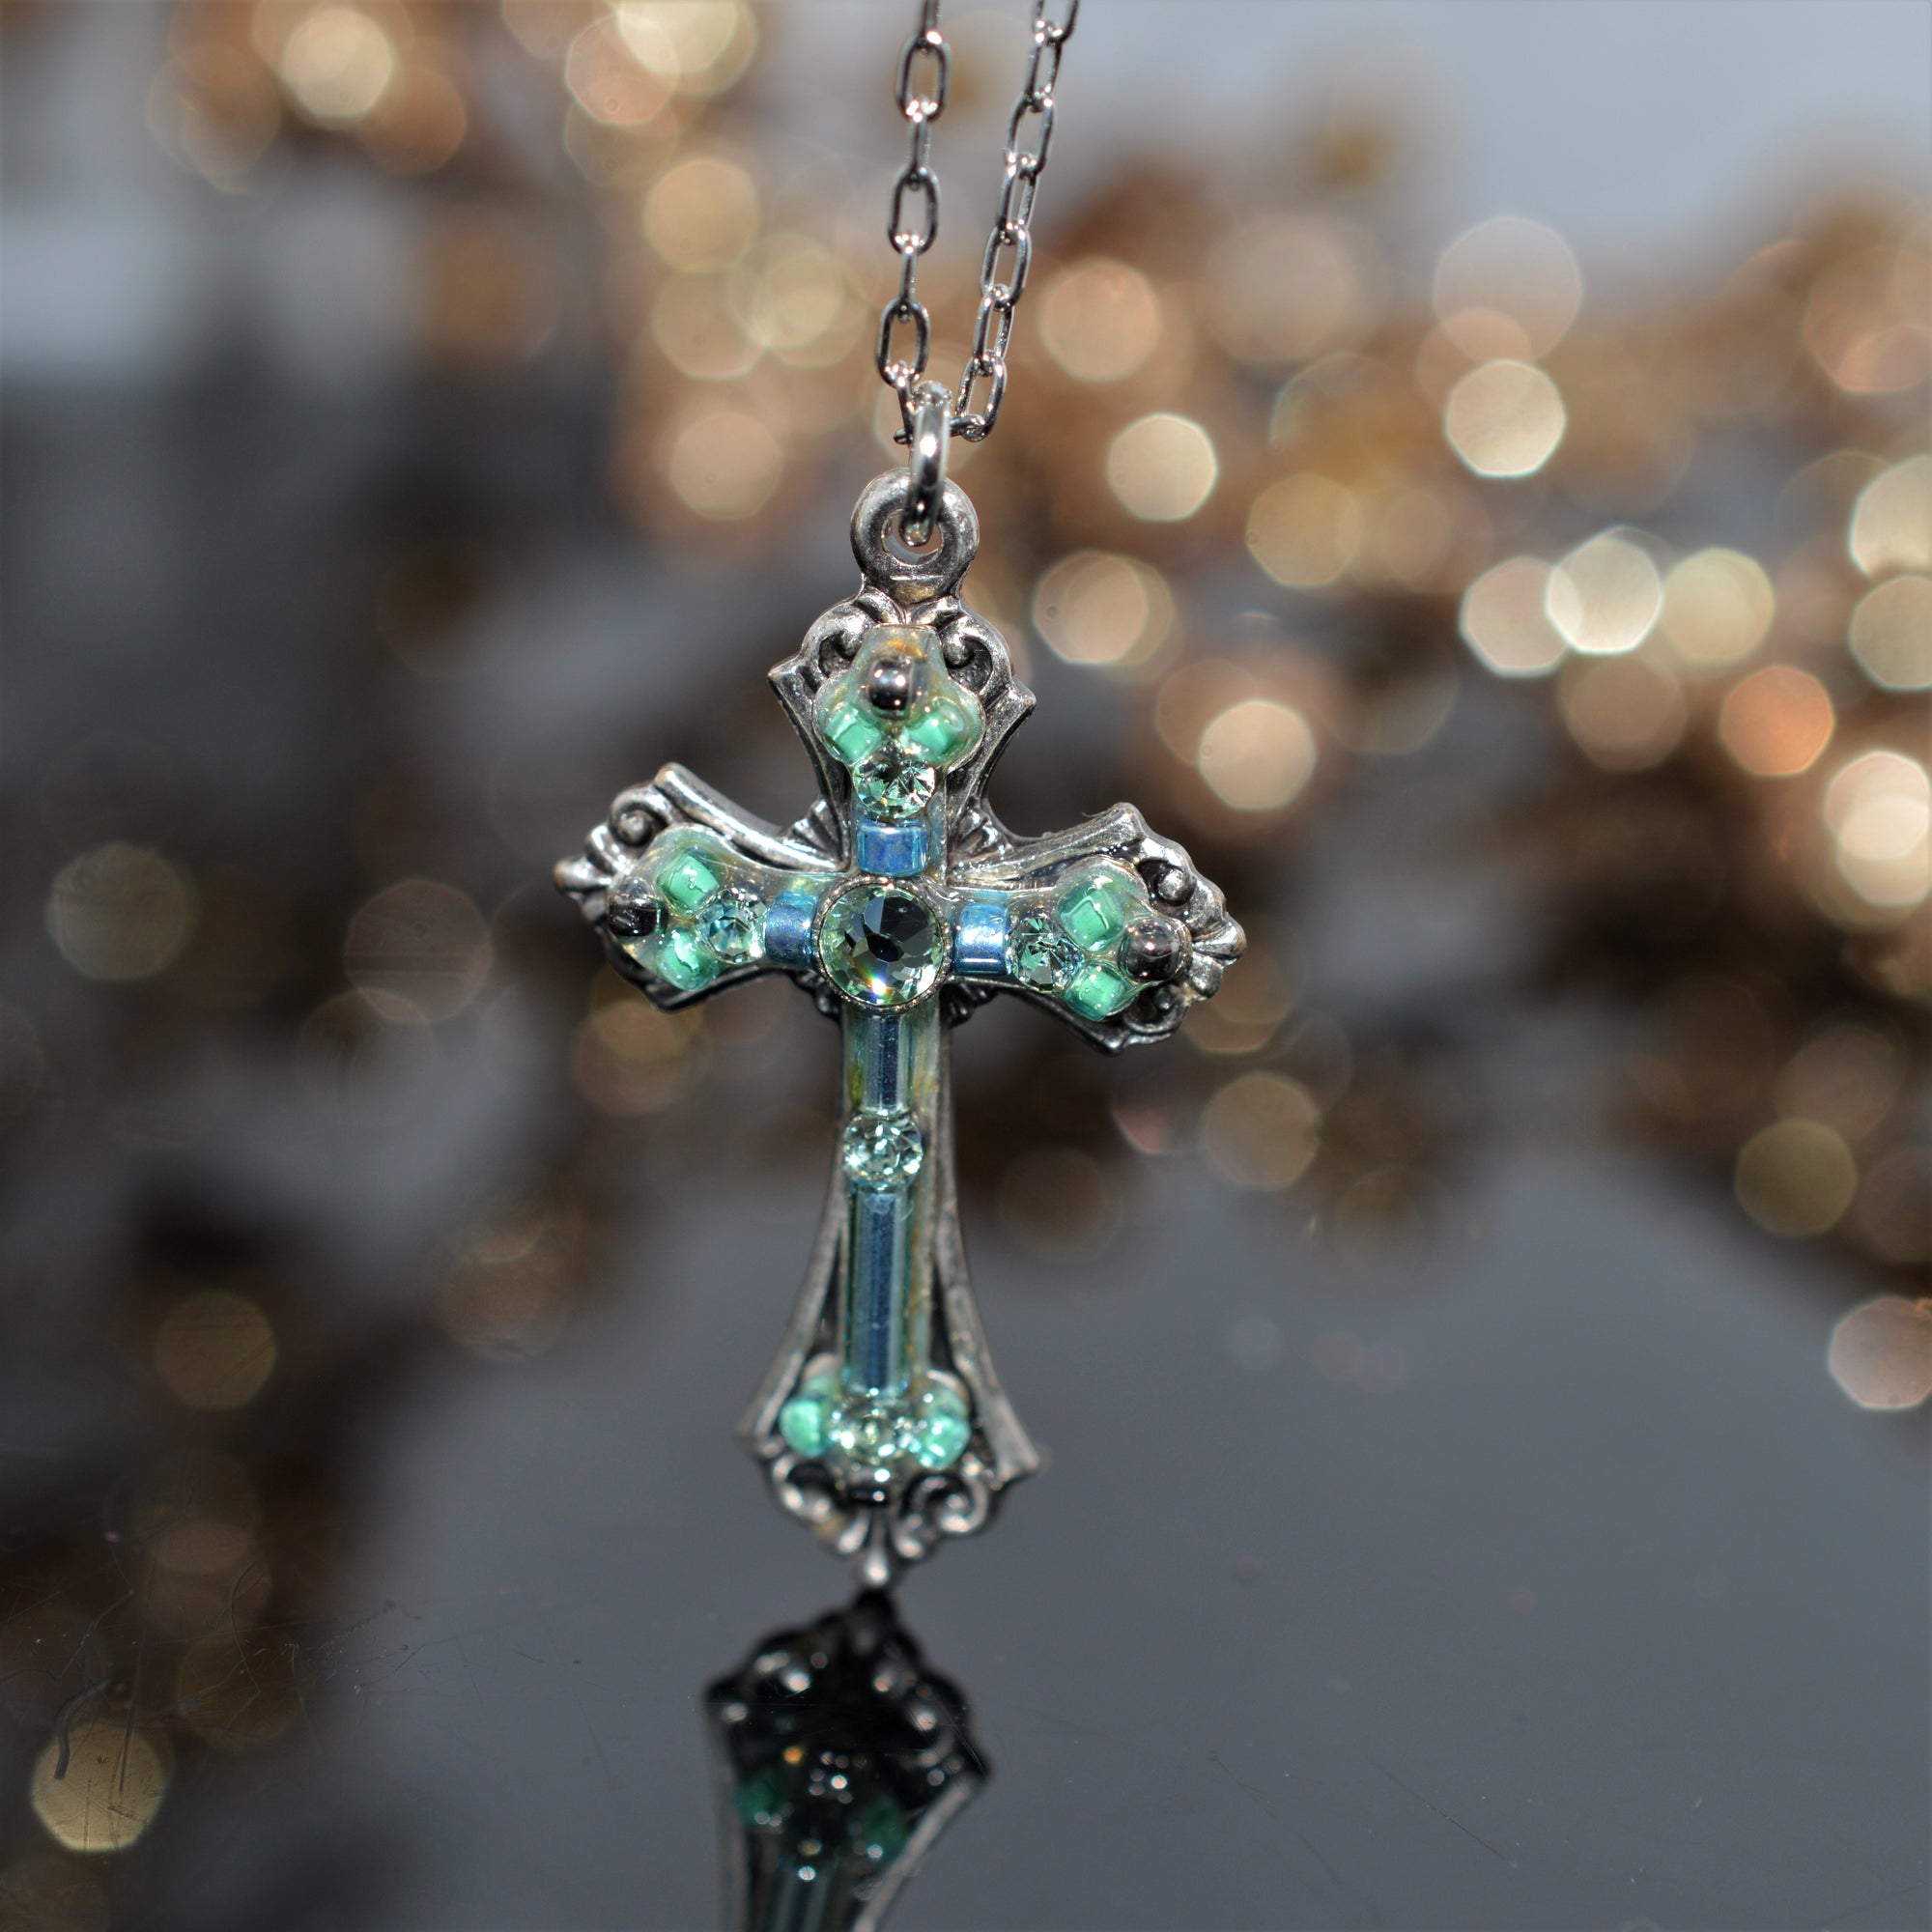 Antique Silver Plated Cross Pendant With Aquamarine Colored Crystals by Firefly